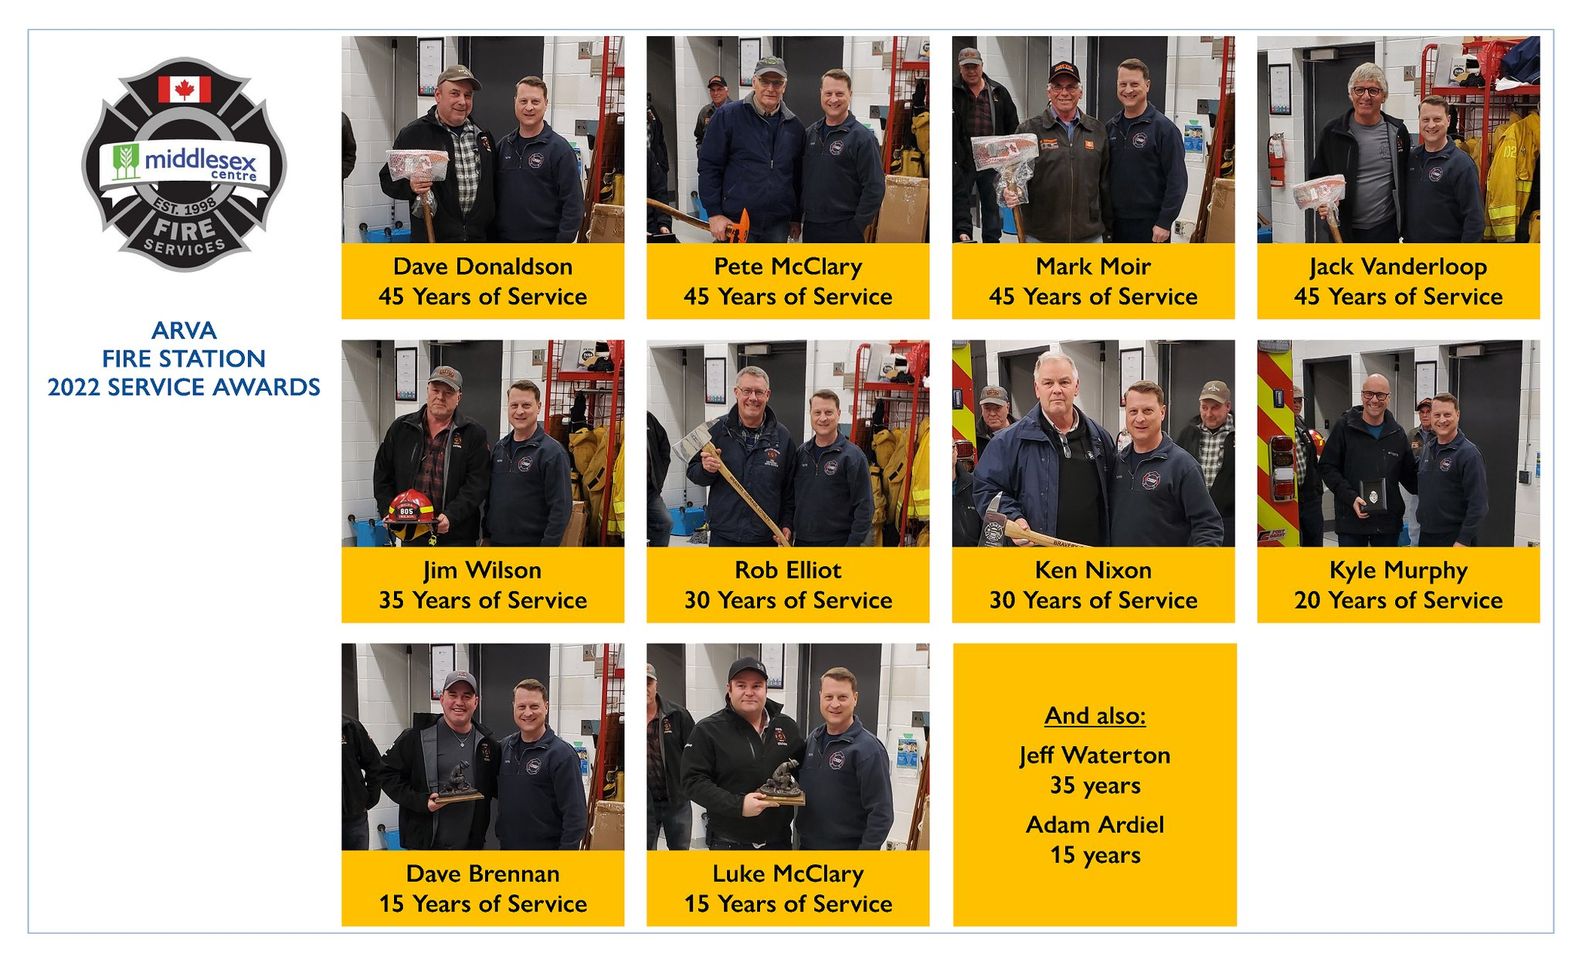 Arva Fire Station - Years of Service Awards 2022